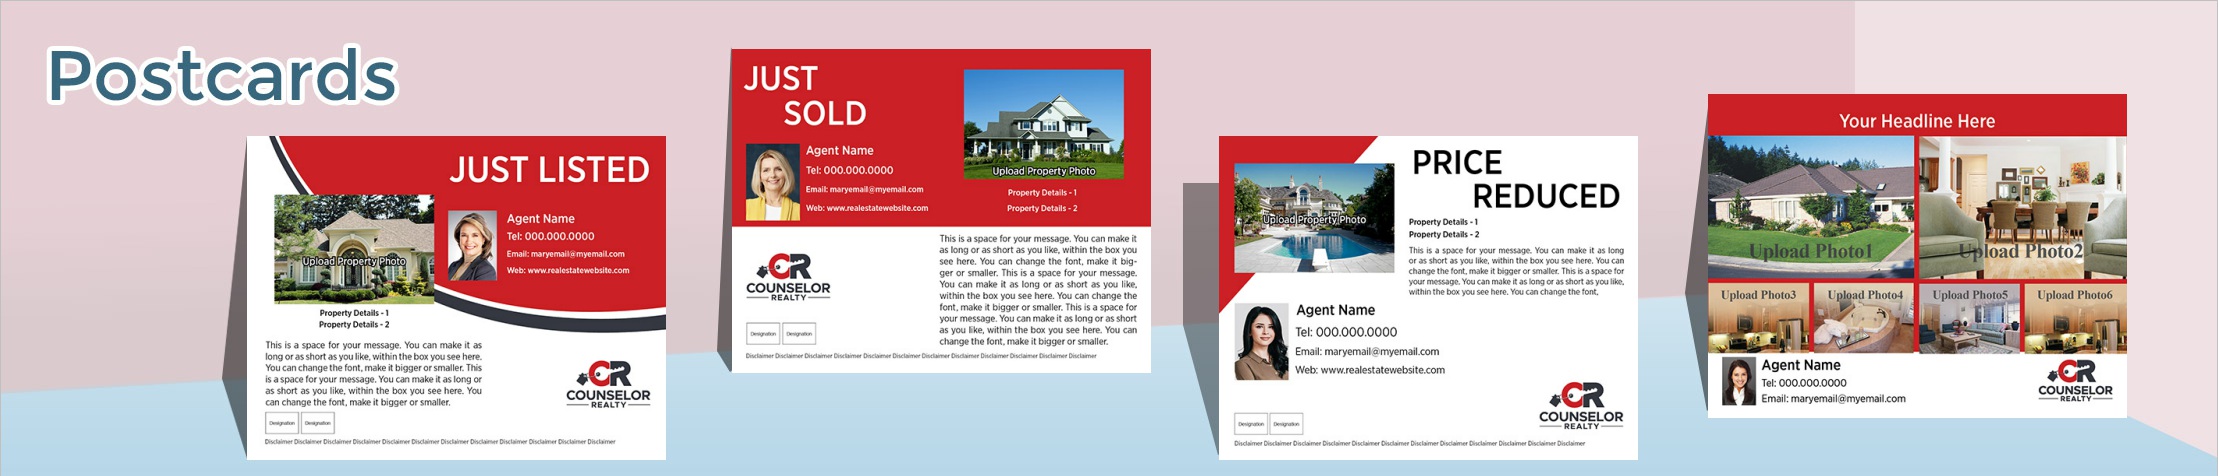 Counselor Realty Real Estate Postcards - COUR postcard templates and direct mail postcard mailing services | BestPrintBuy.com